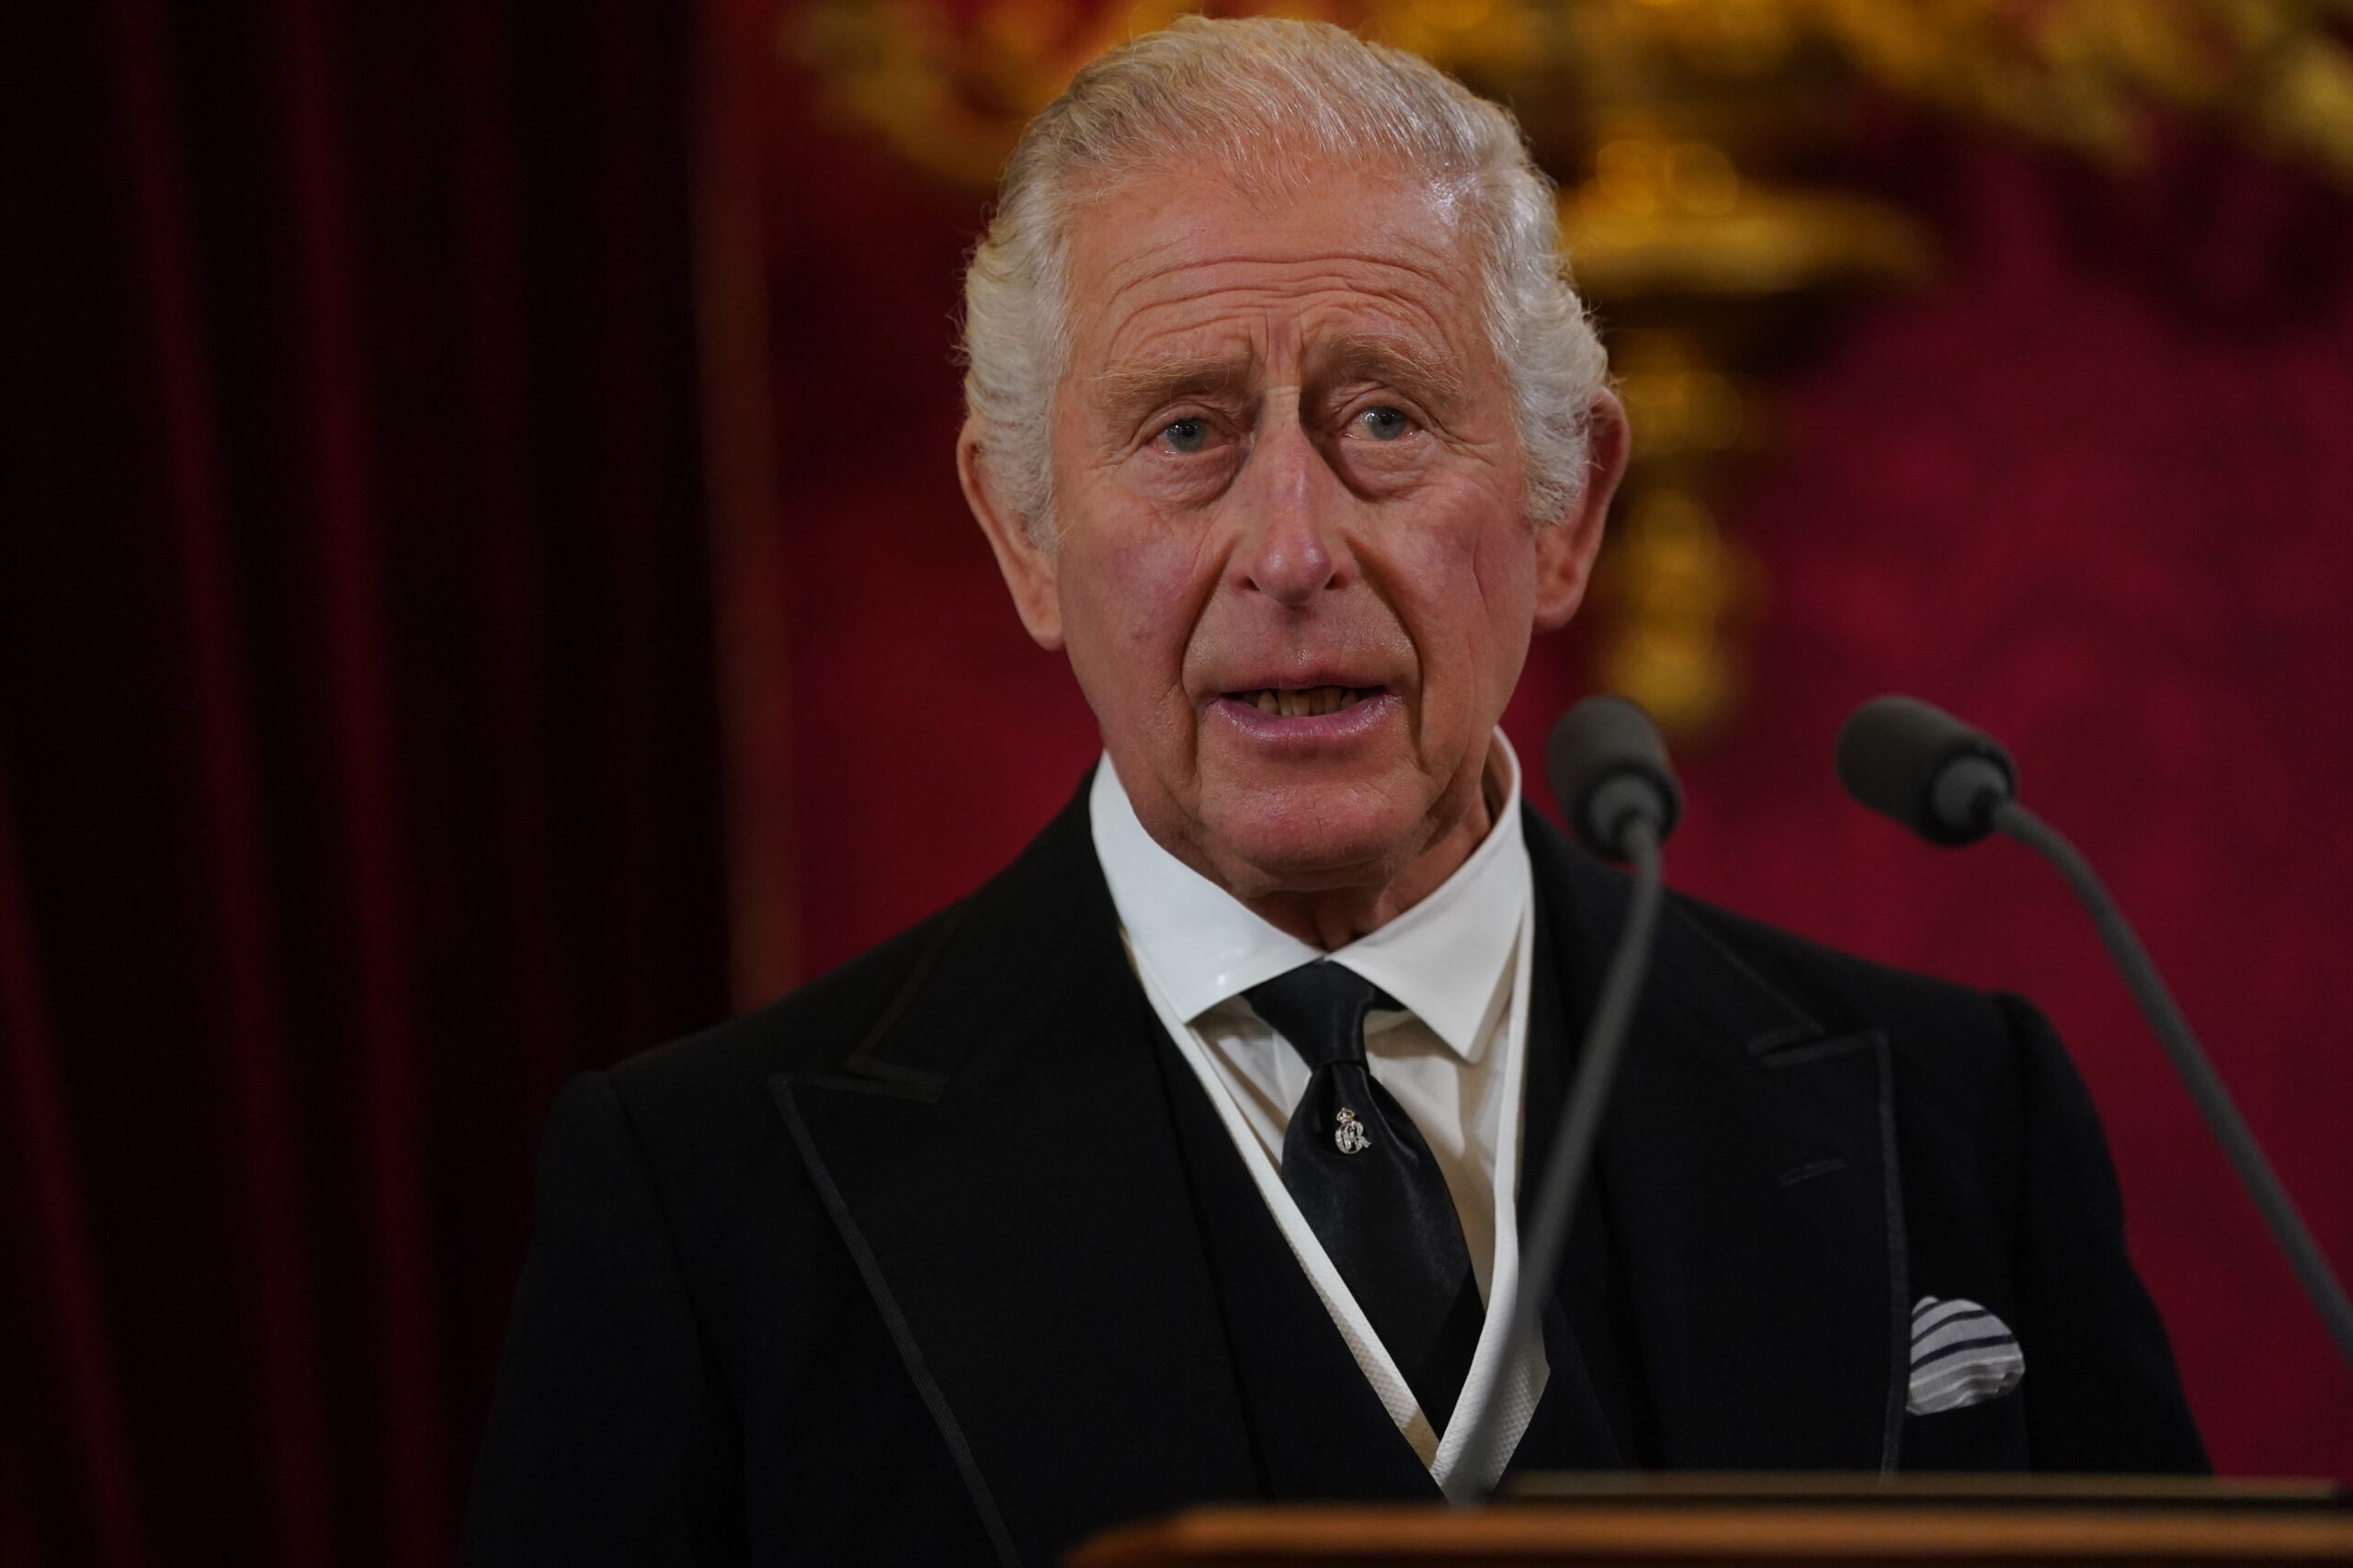 King Charles III during the Accession Council at St James's Palace, London, Saturday, Sept. 10, 2022, where he is formally proclaimed monarch. (Victoria Jones/Pool Photo via AP)